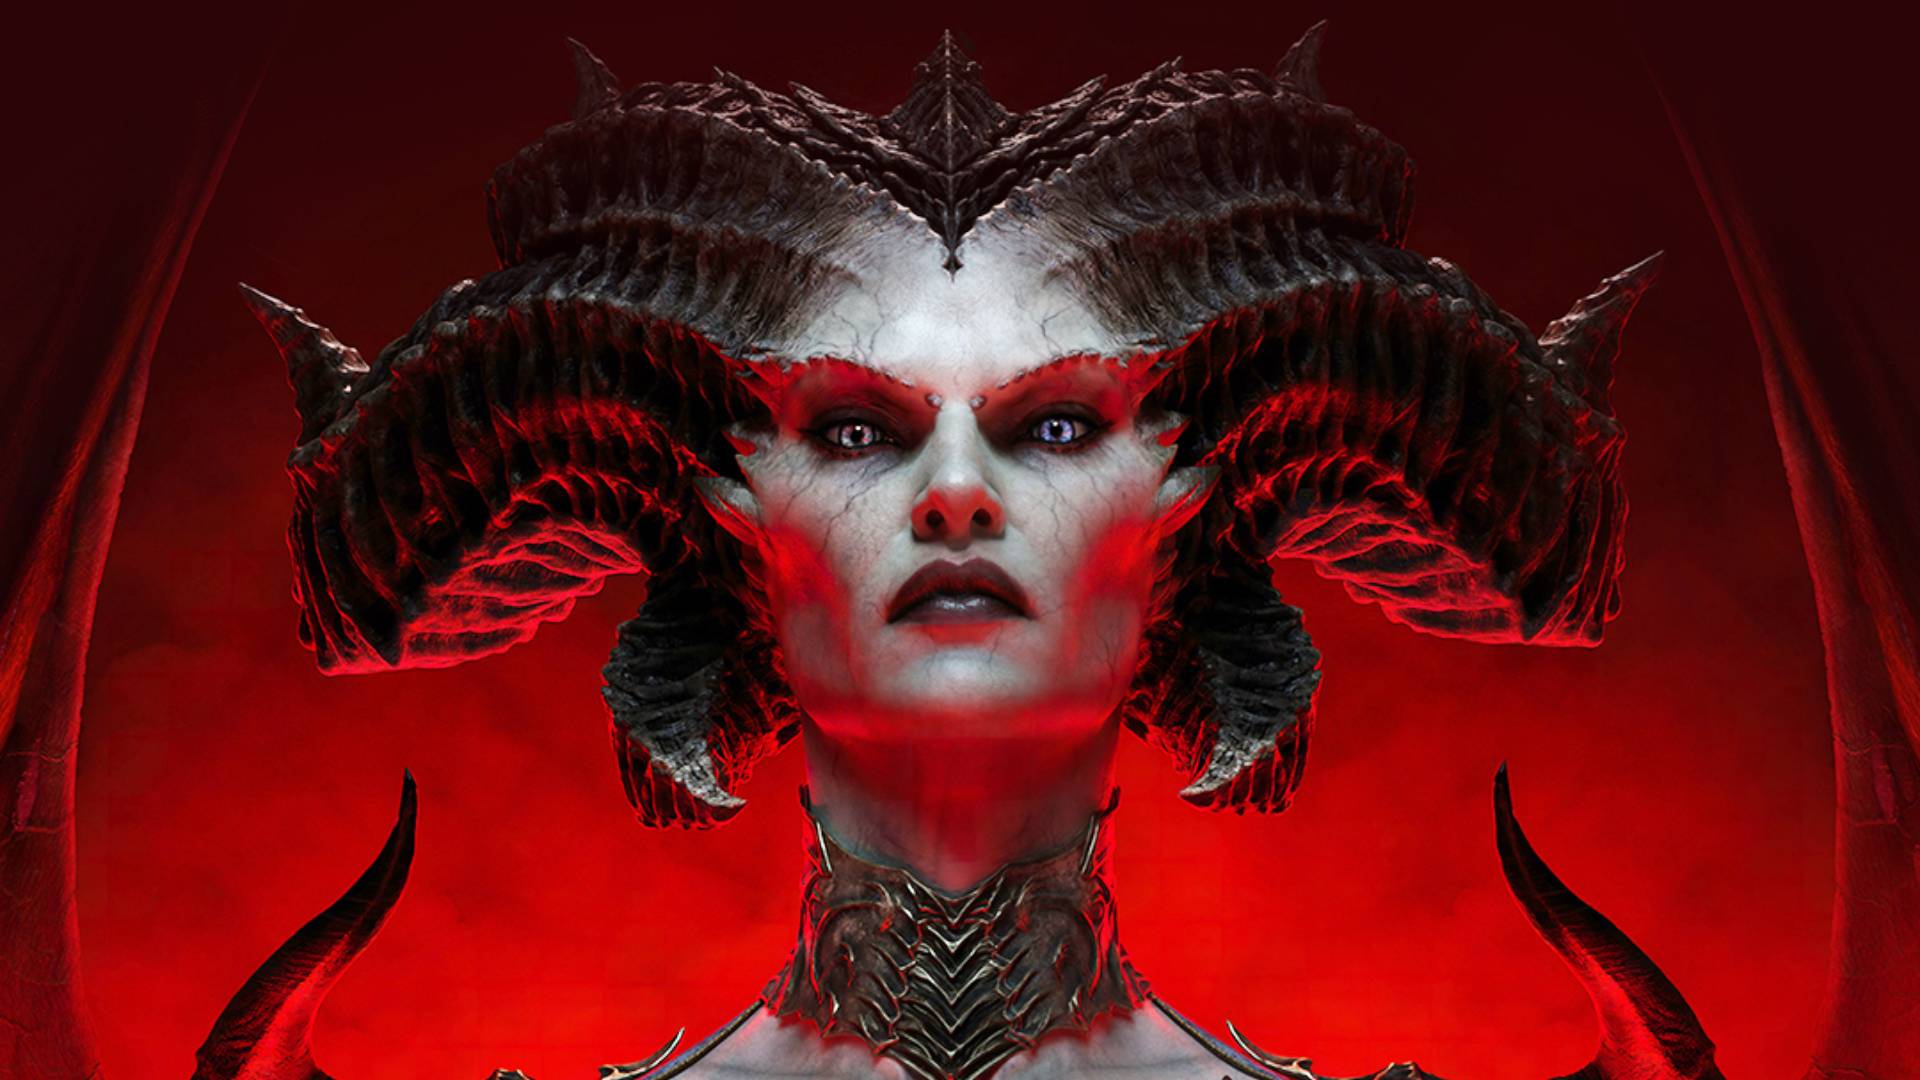 Diablo 4 Lilith crossover coming to Immortal: A horned demon with piercing eyes, Lilith from RPG game Diablo 4